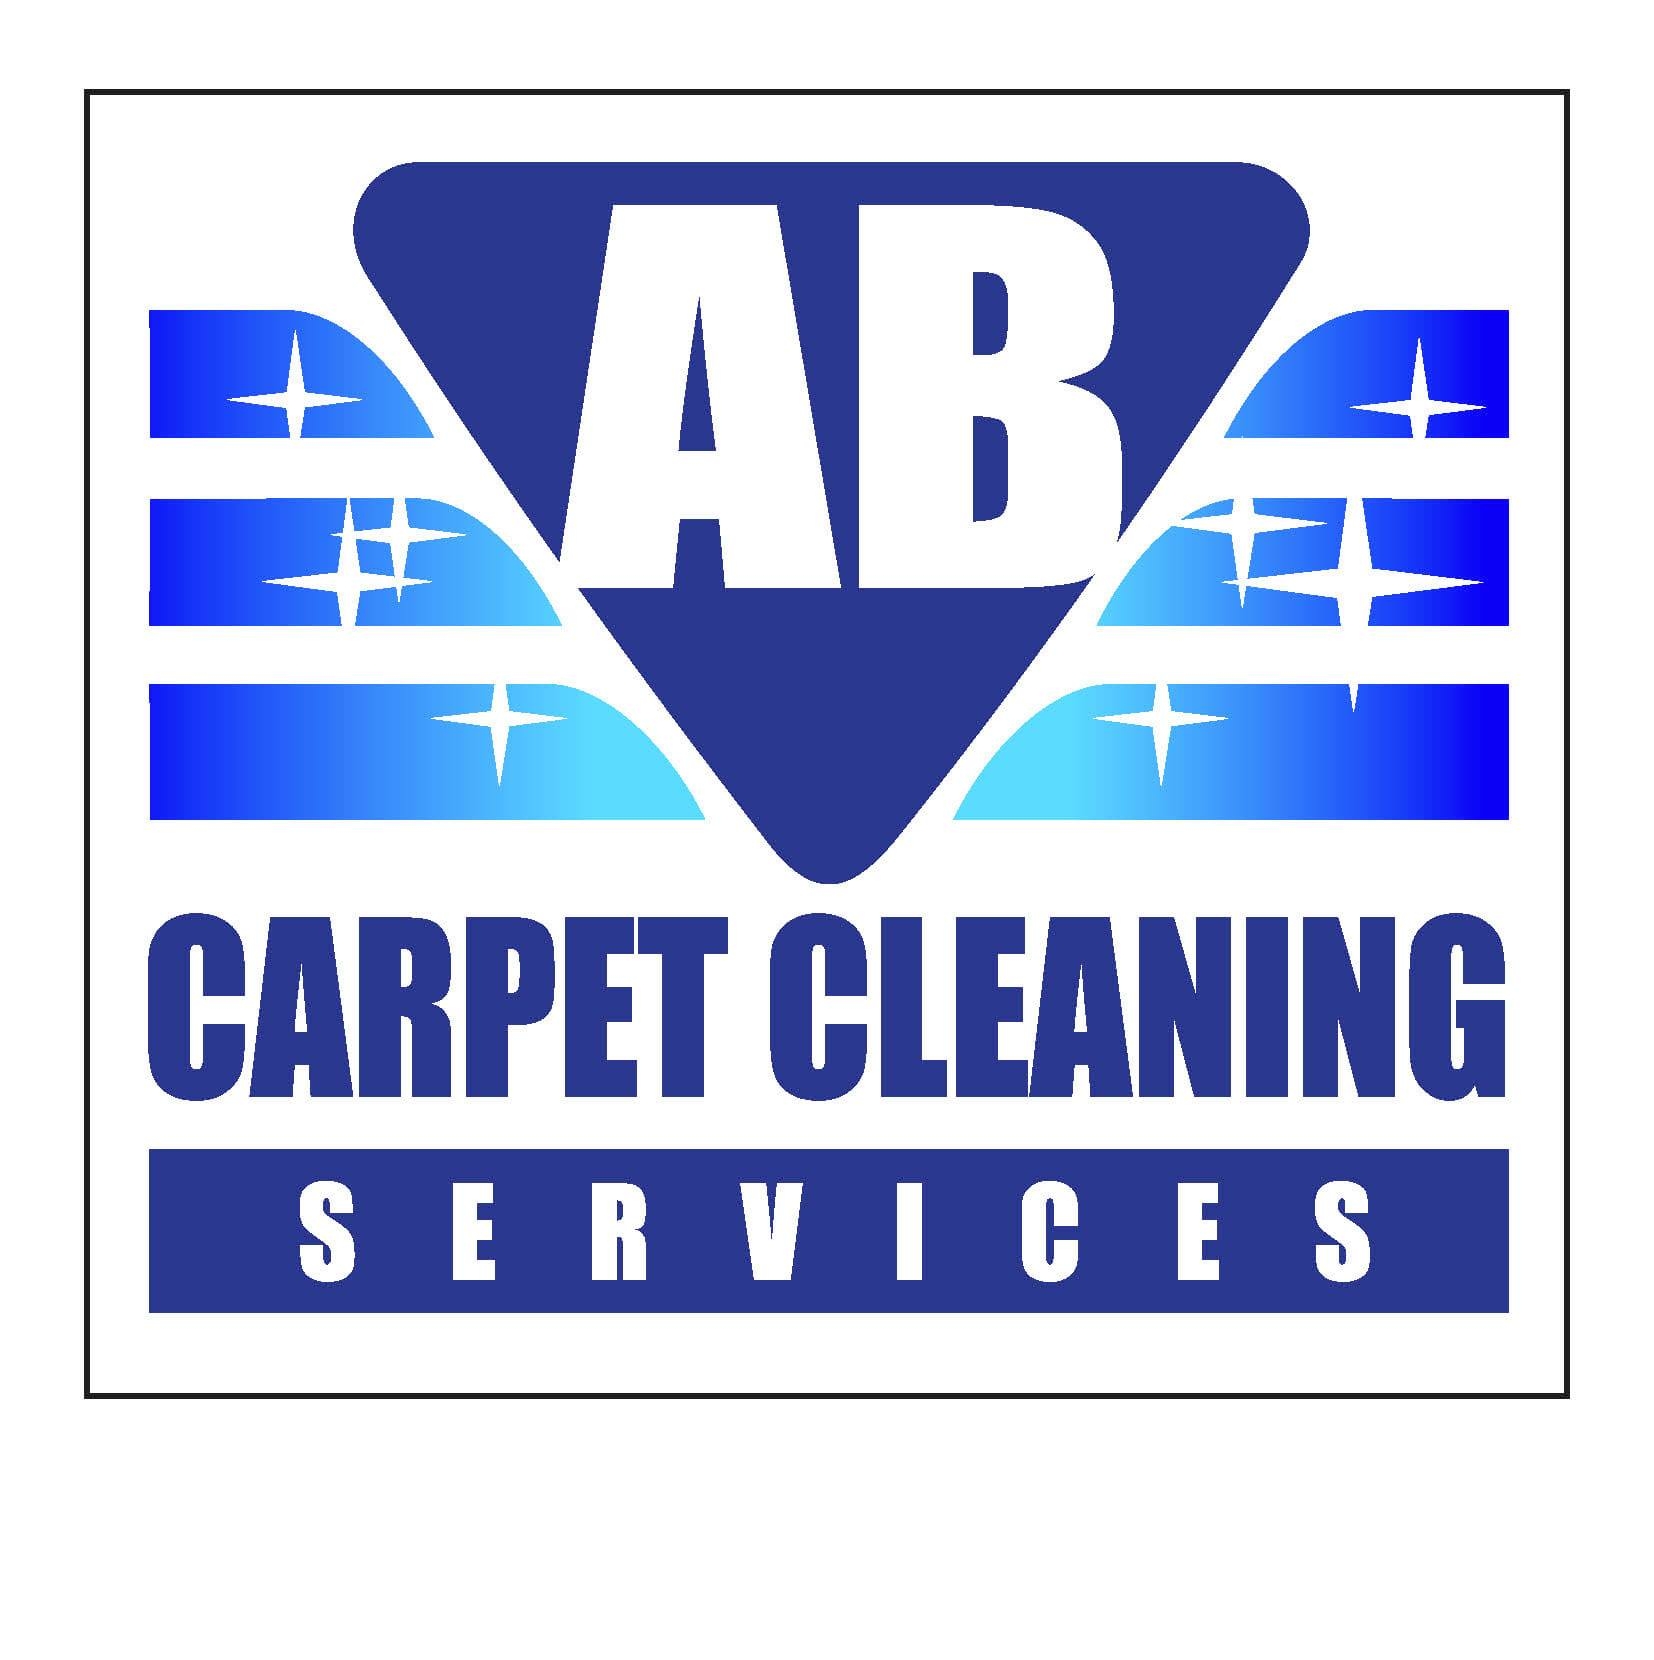 AB Carpet Cleaning Services